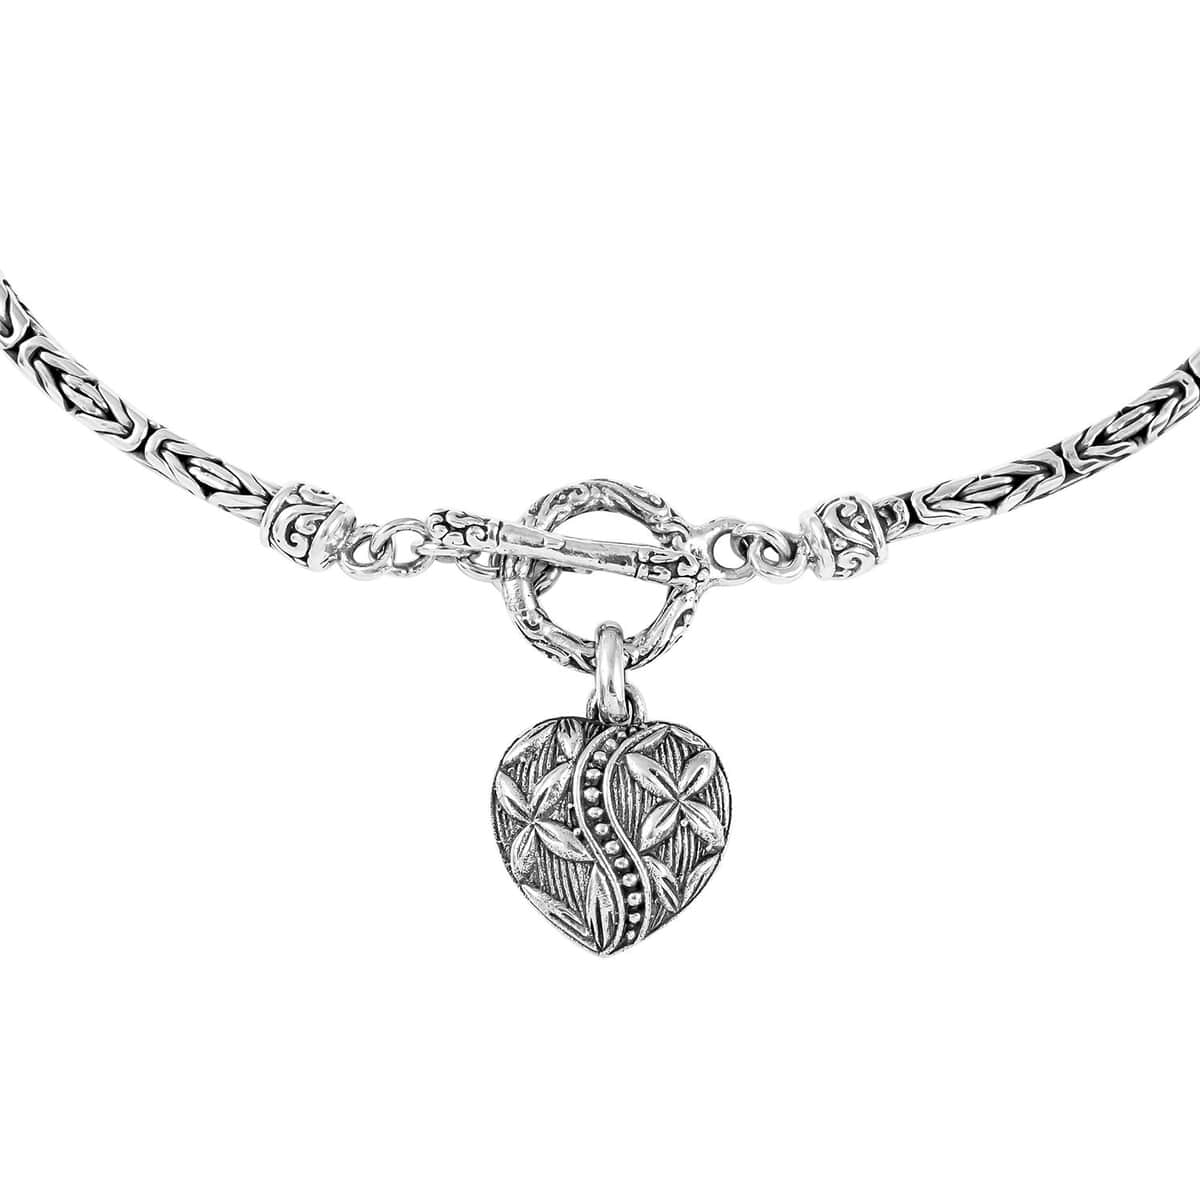 BALI LEGACY Sterling Silver Heart Charm Borobudur Necklace 18 Inches 45 Grams image number 0